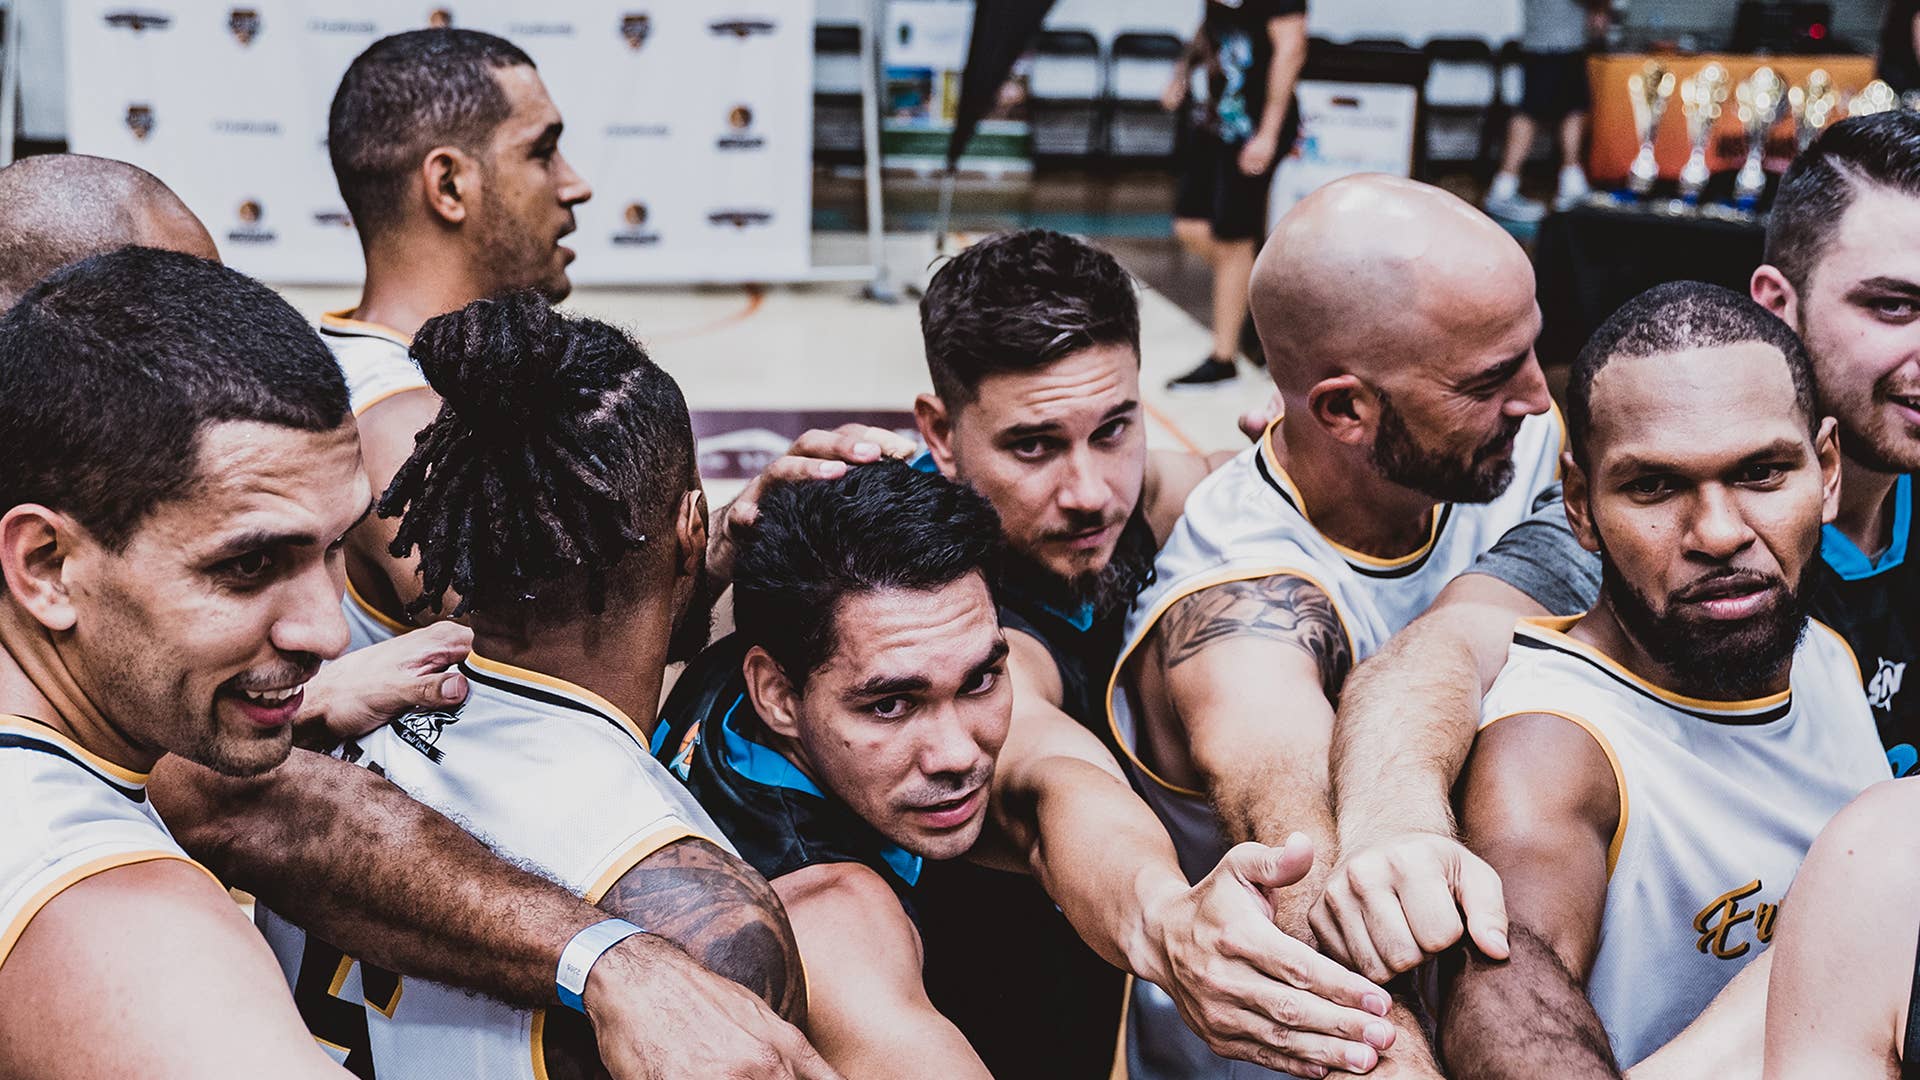 Players gathered at the Australian Indigenous Basketball Tournament